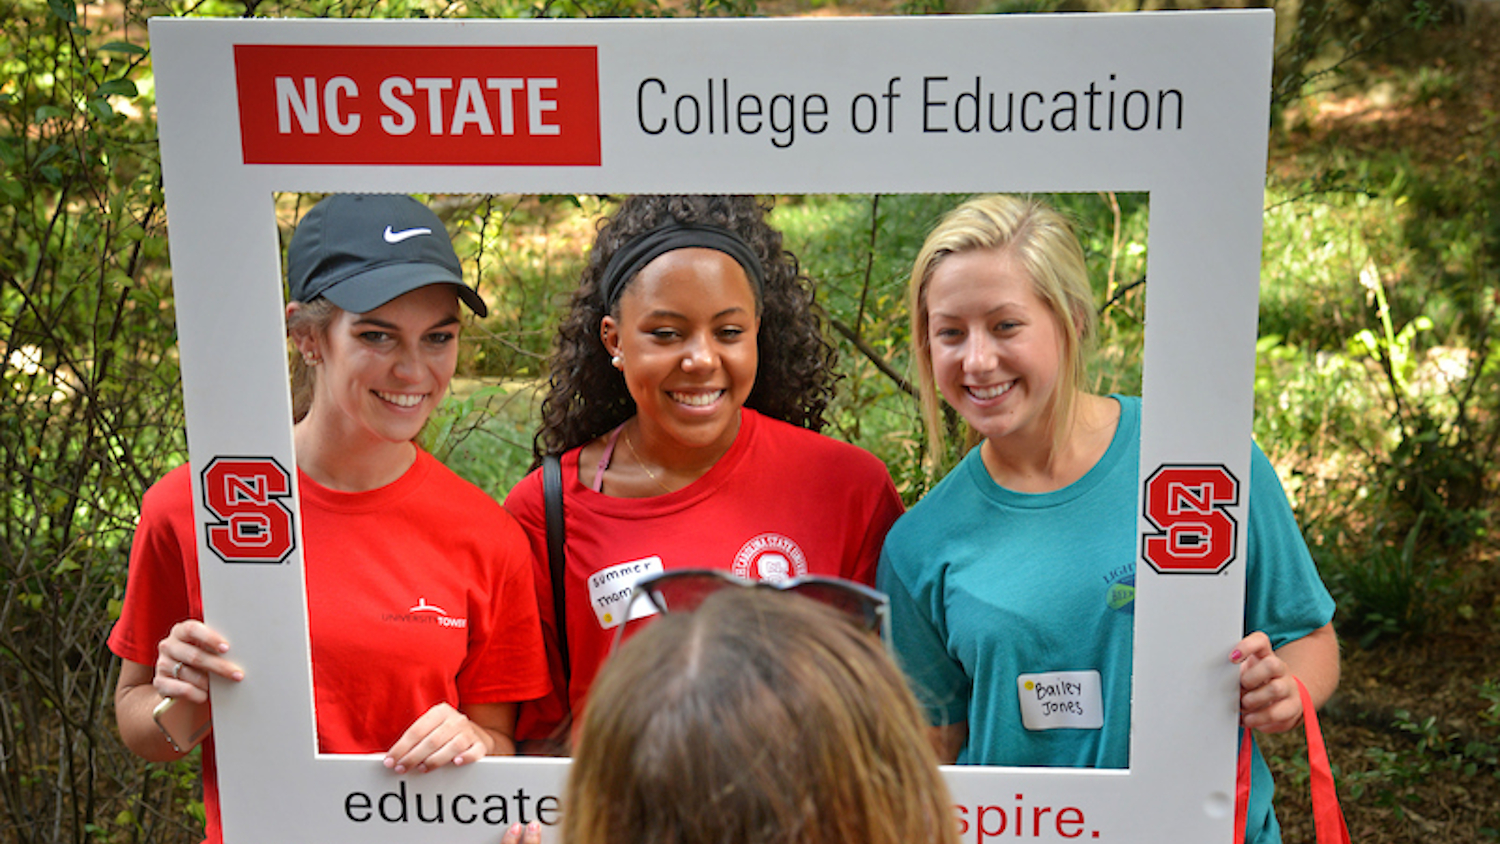 College of Education students pose for a photo during Wolfpack Welcome Week celebration outside Poe Hall.